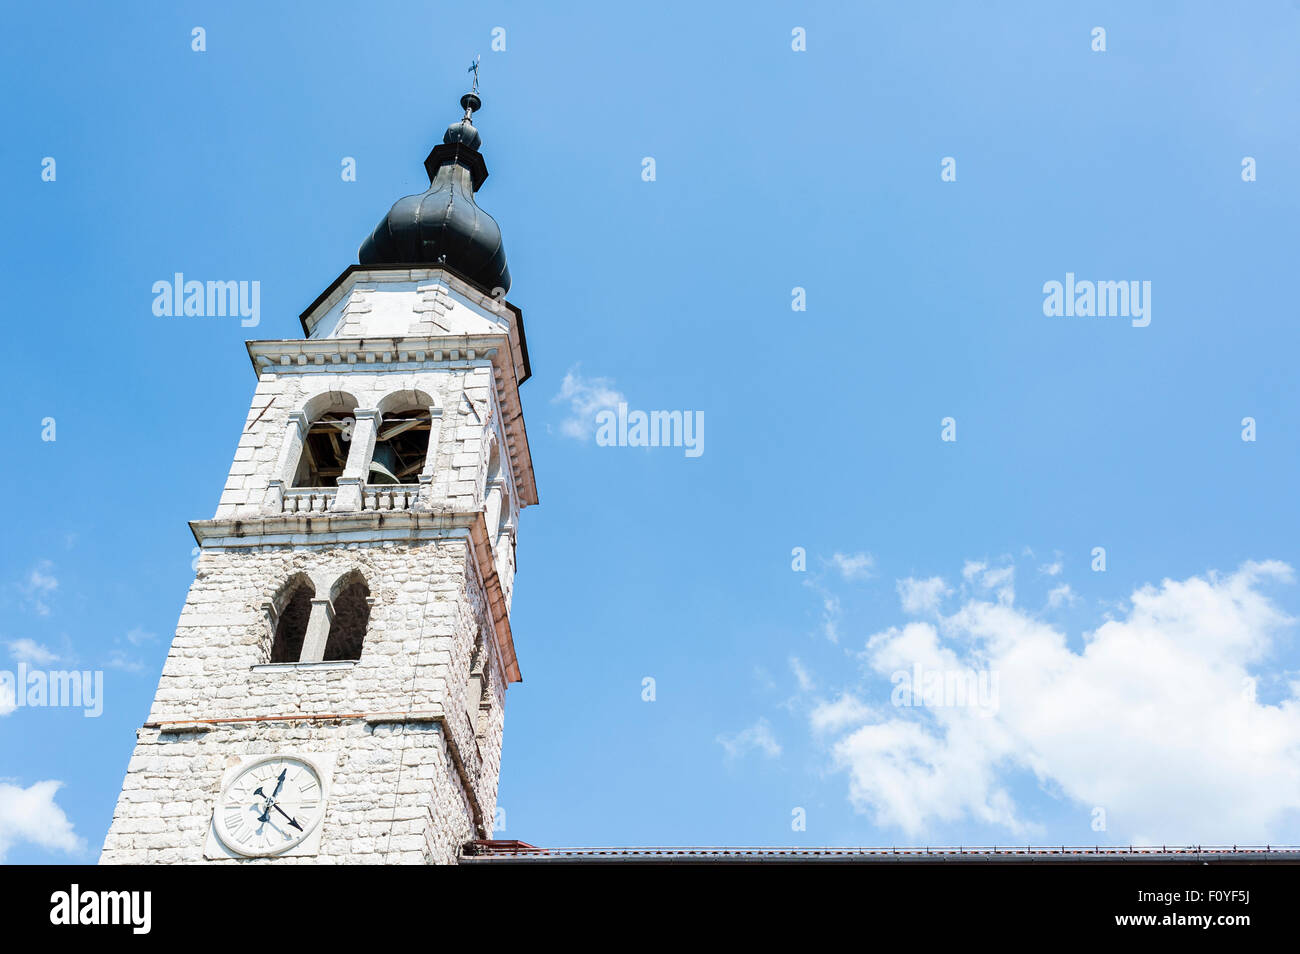 Bell tower of a church in northern Italy Stock Photo